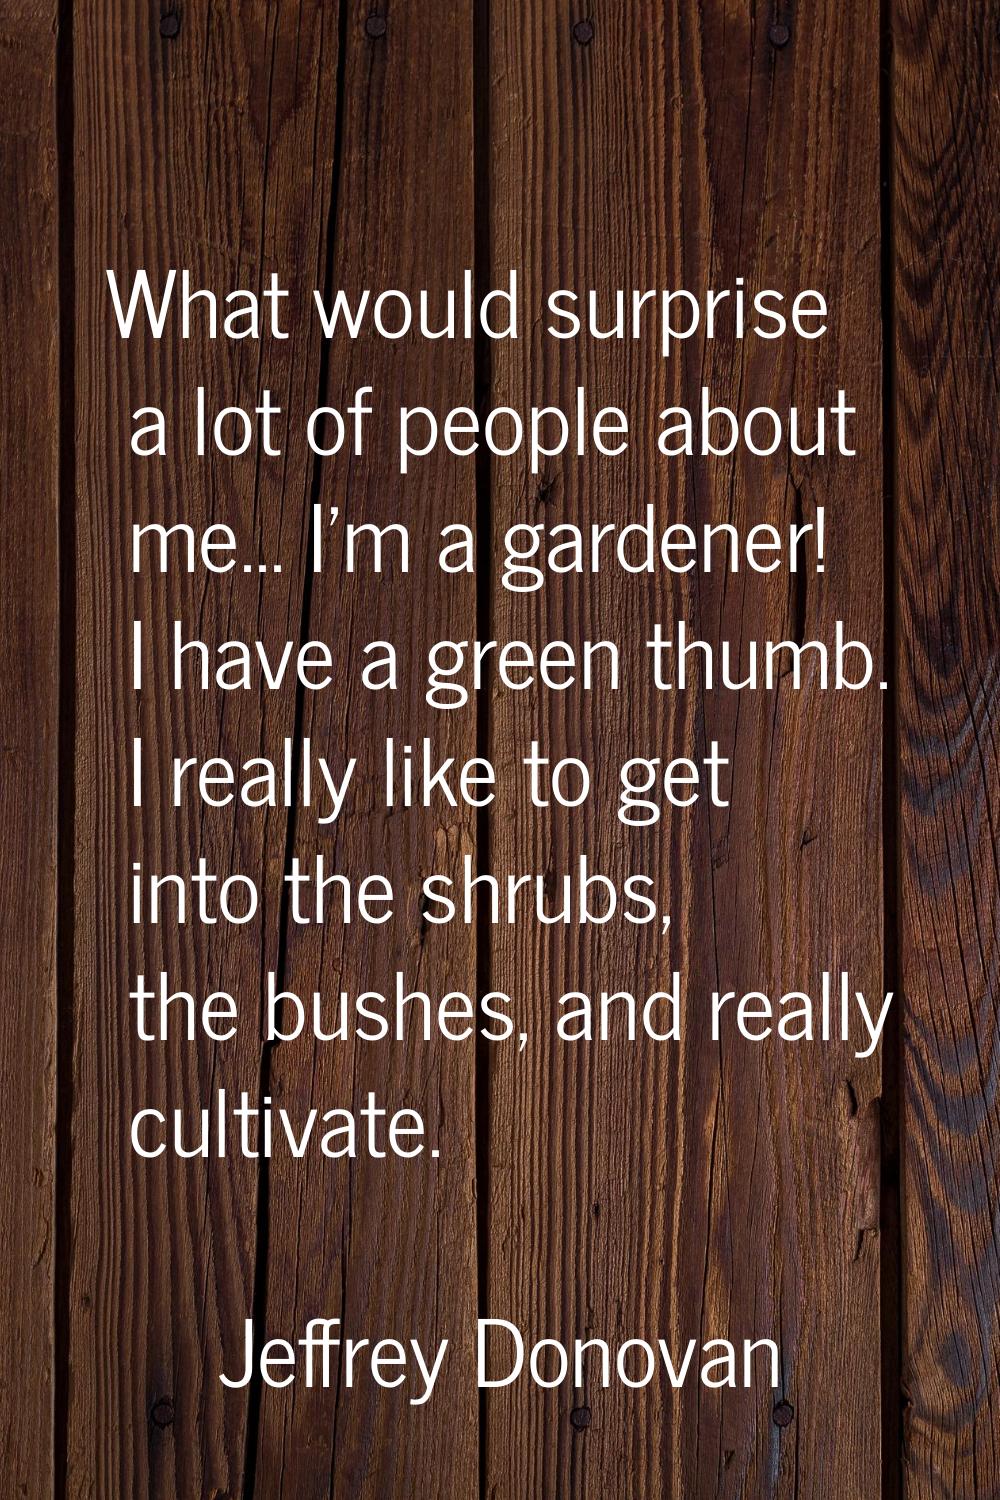 What would surprise a lot of people about me... I'm a gardener! I have a green thumb. I really like